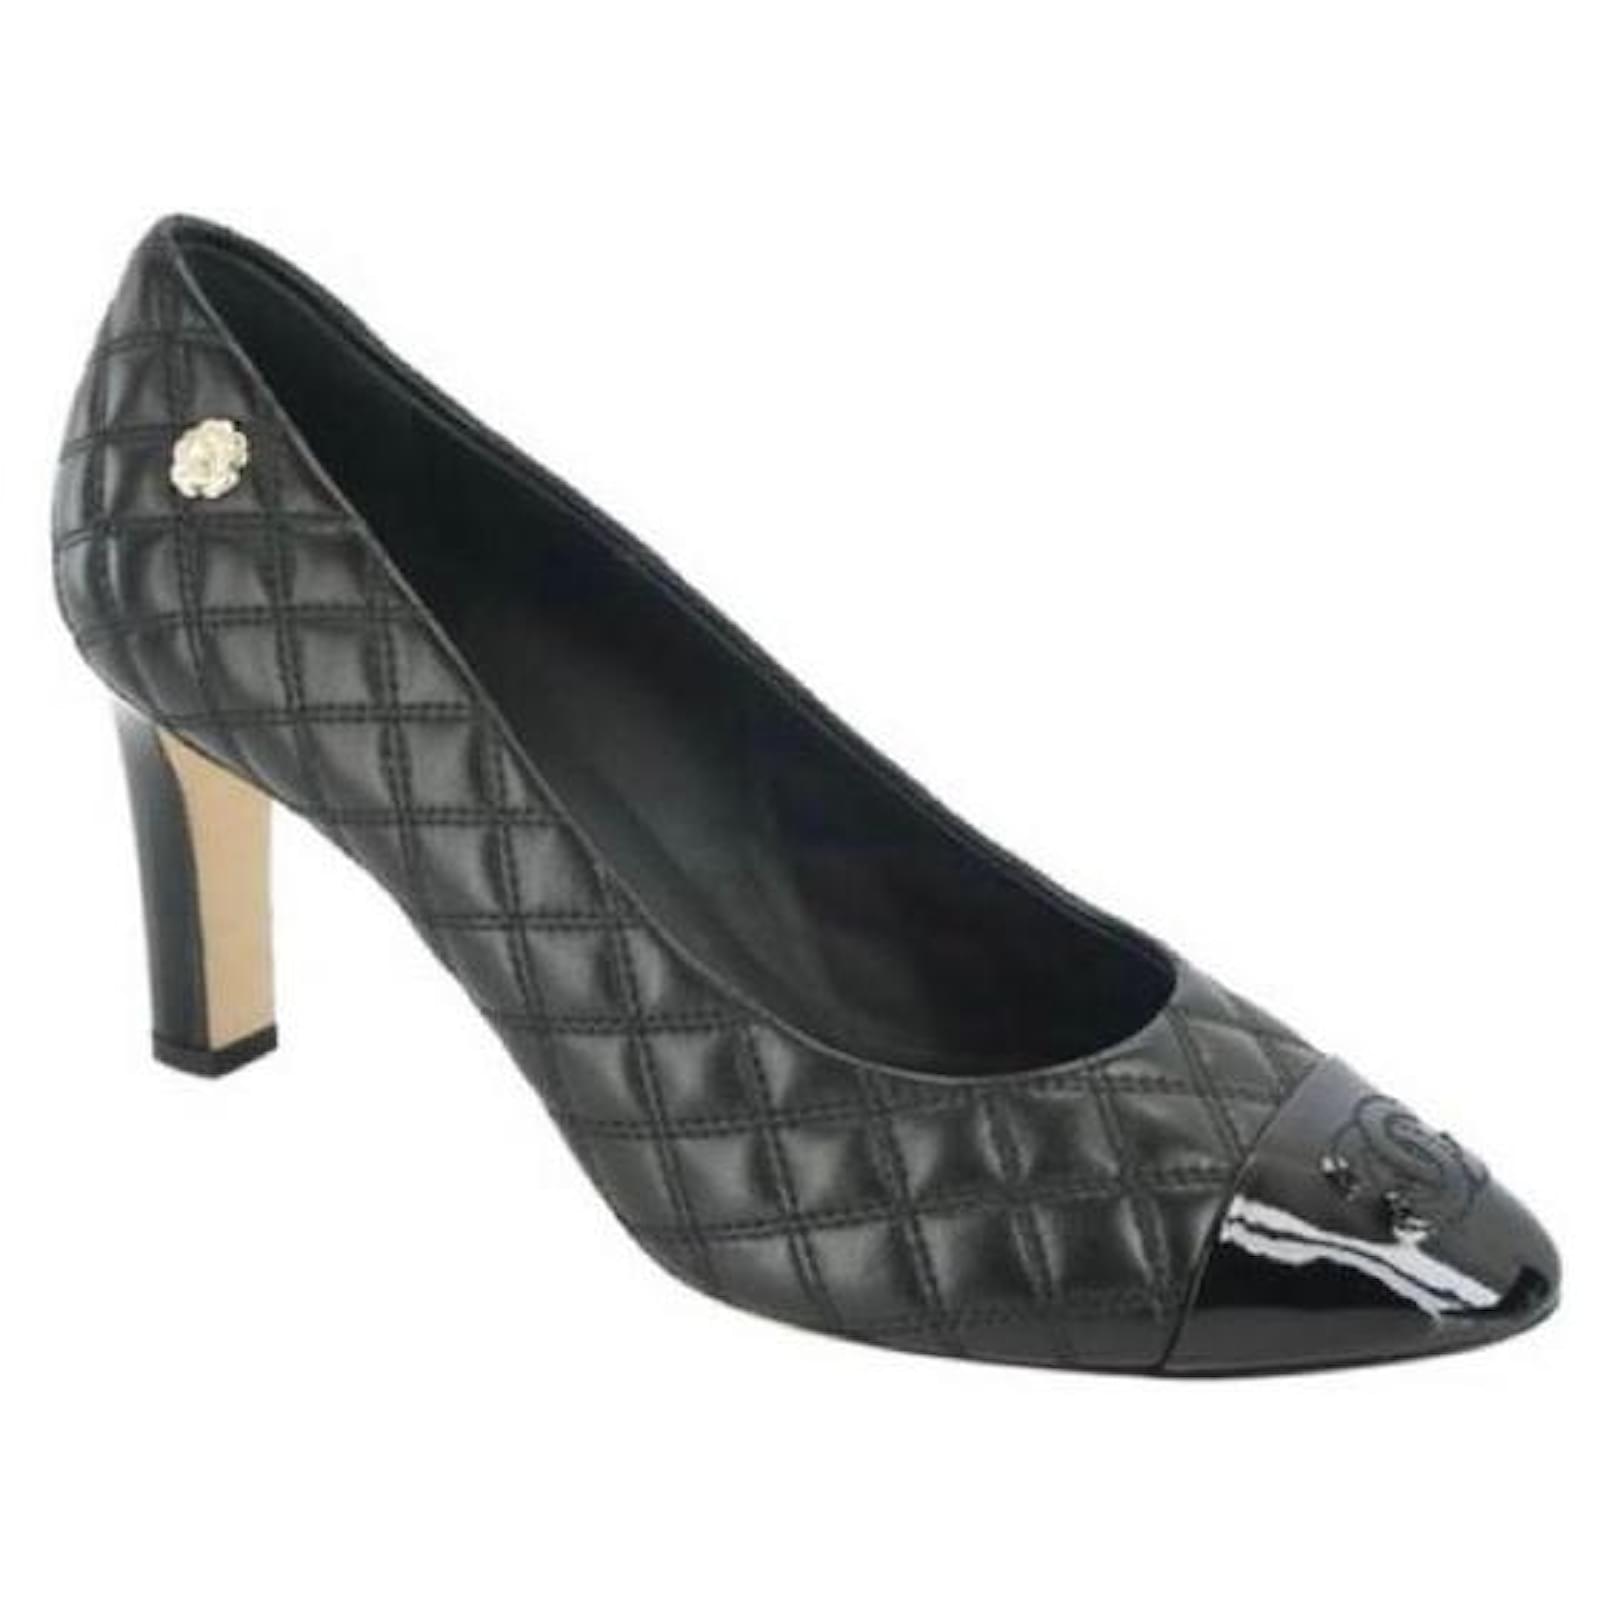 Chanel Black Camellia Quilted Leather Pump Heels with Patent Cap